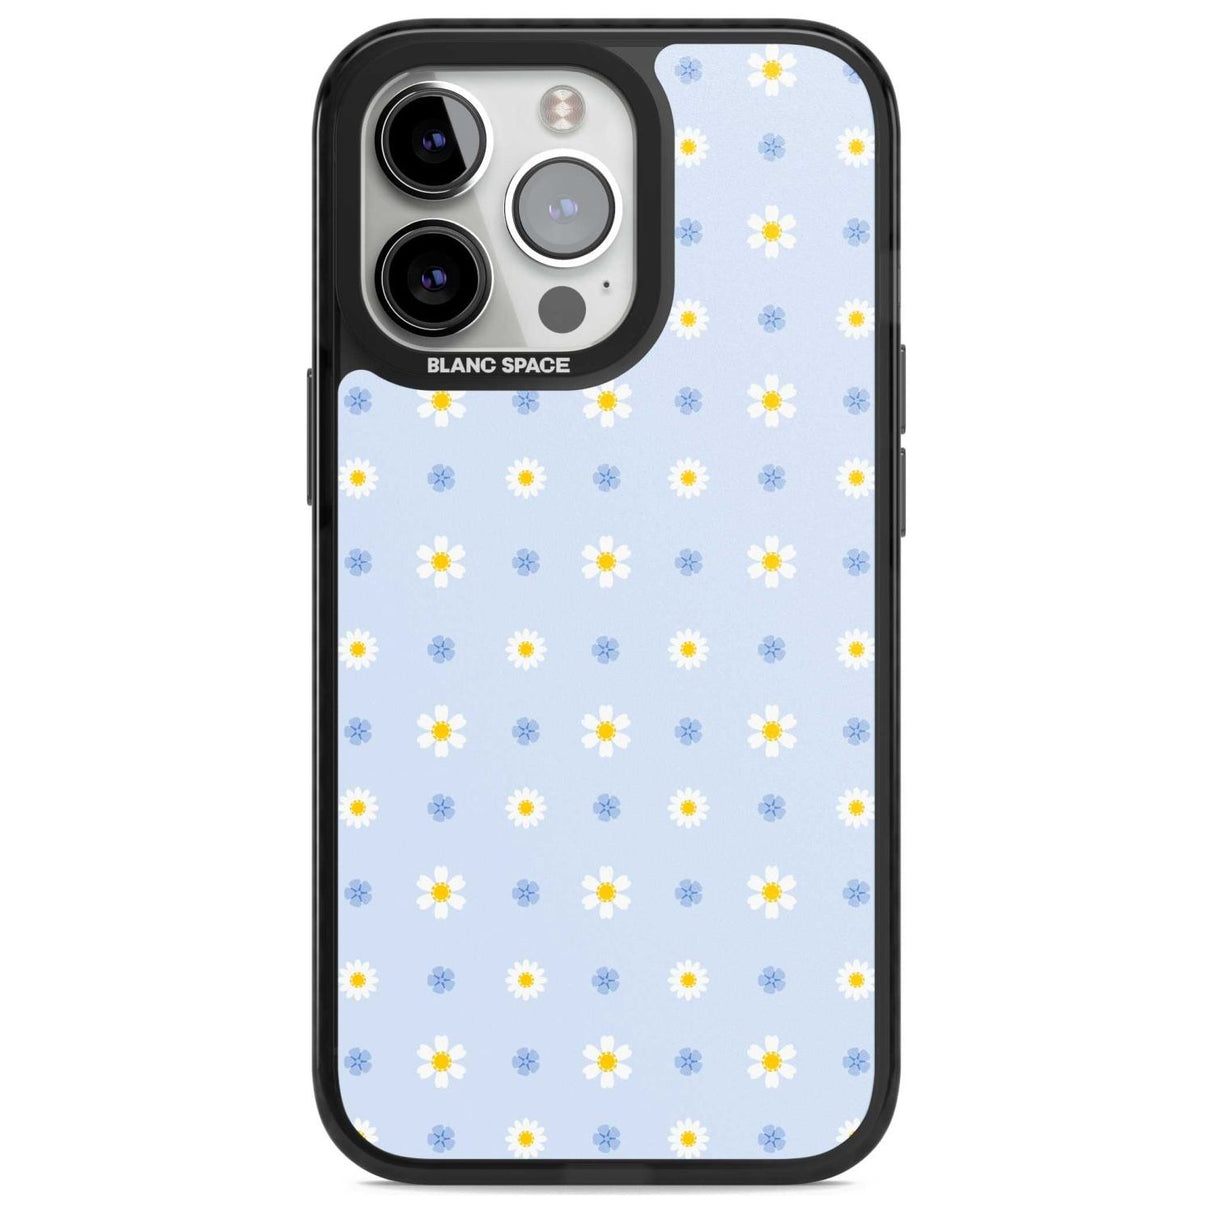 Pale Blue Daisies Phone Case iPhone 15 Pro Max / Magsafe Black Impact Case,iPhone 15 Pro / Magsafe Black Impact Case,iPhone 14 Pro Max / Magsafe Black Impact Case,iPhone 14 Pro / Magsafe Black Impact Case,iPhone 13 Pro / Magsafe Black Impact Case Blanc Space